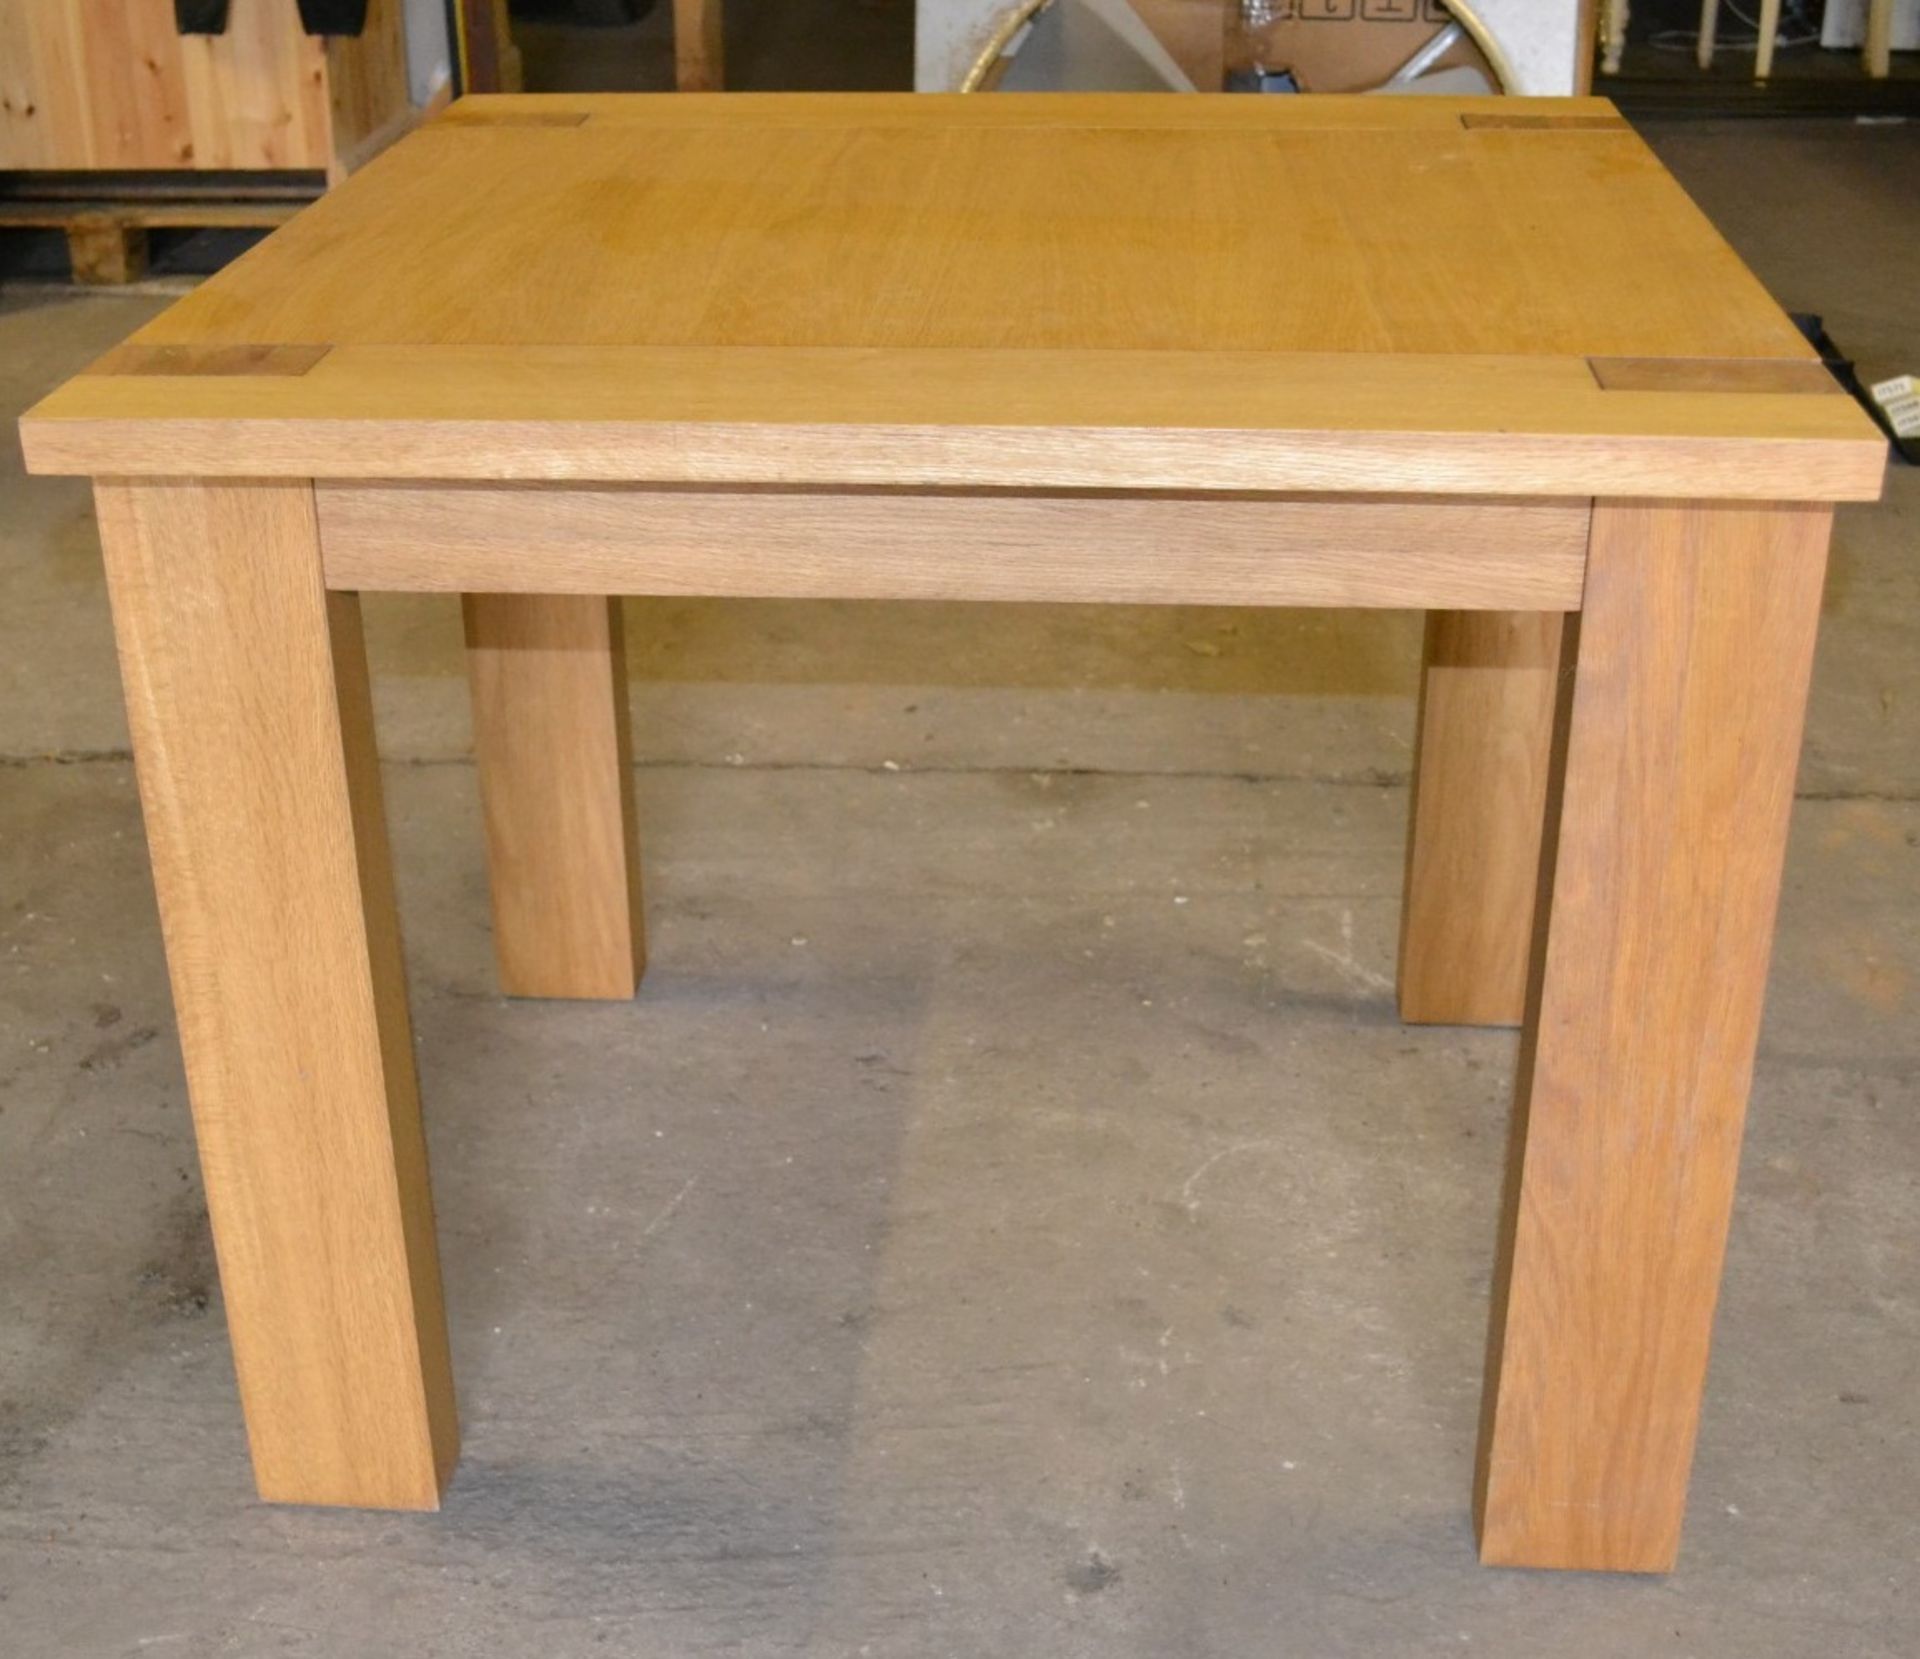 1 x Sturdy Square Wooden Table - Dimensions: 90 x 90 x 76cm - Ref: IT554 - CL403 - Location: - Image 3 of 3